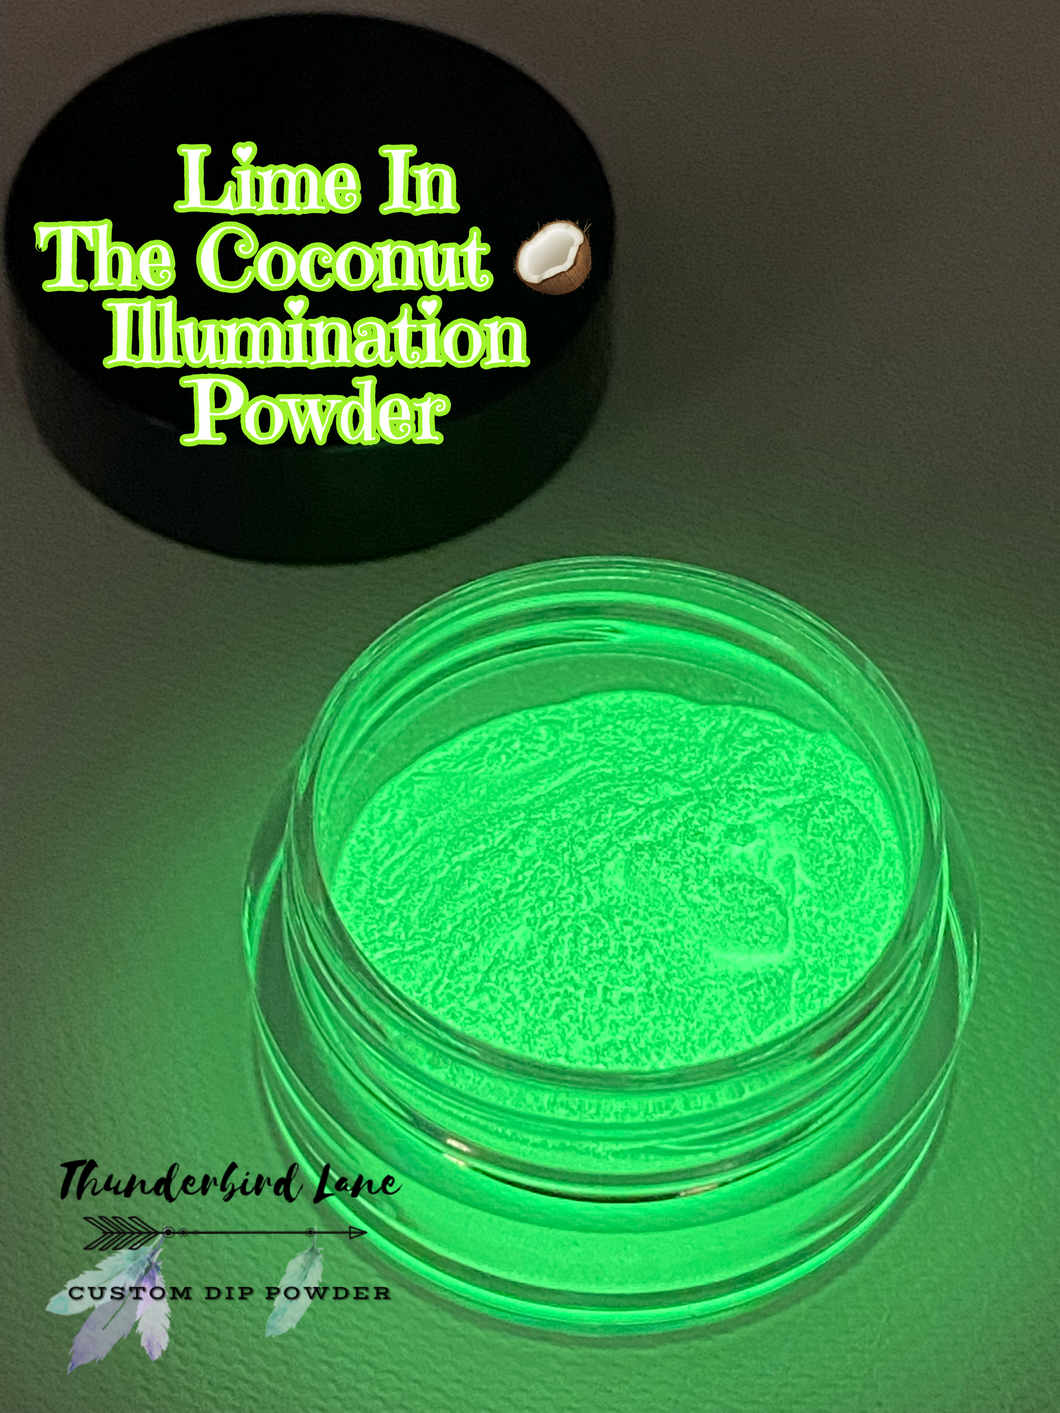 Lime in The Coconut Illumination Powder